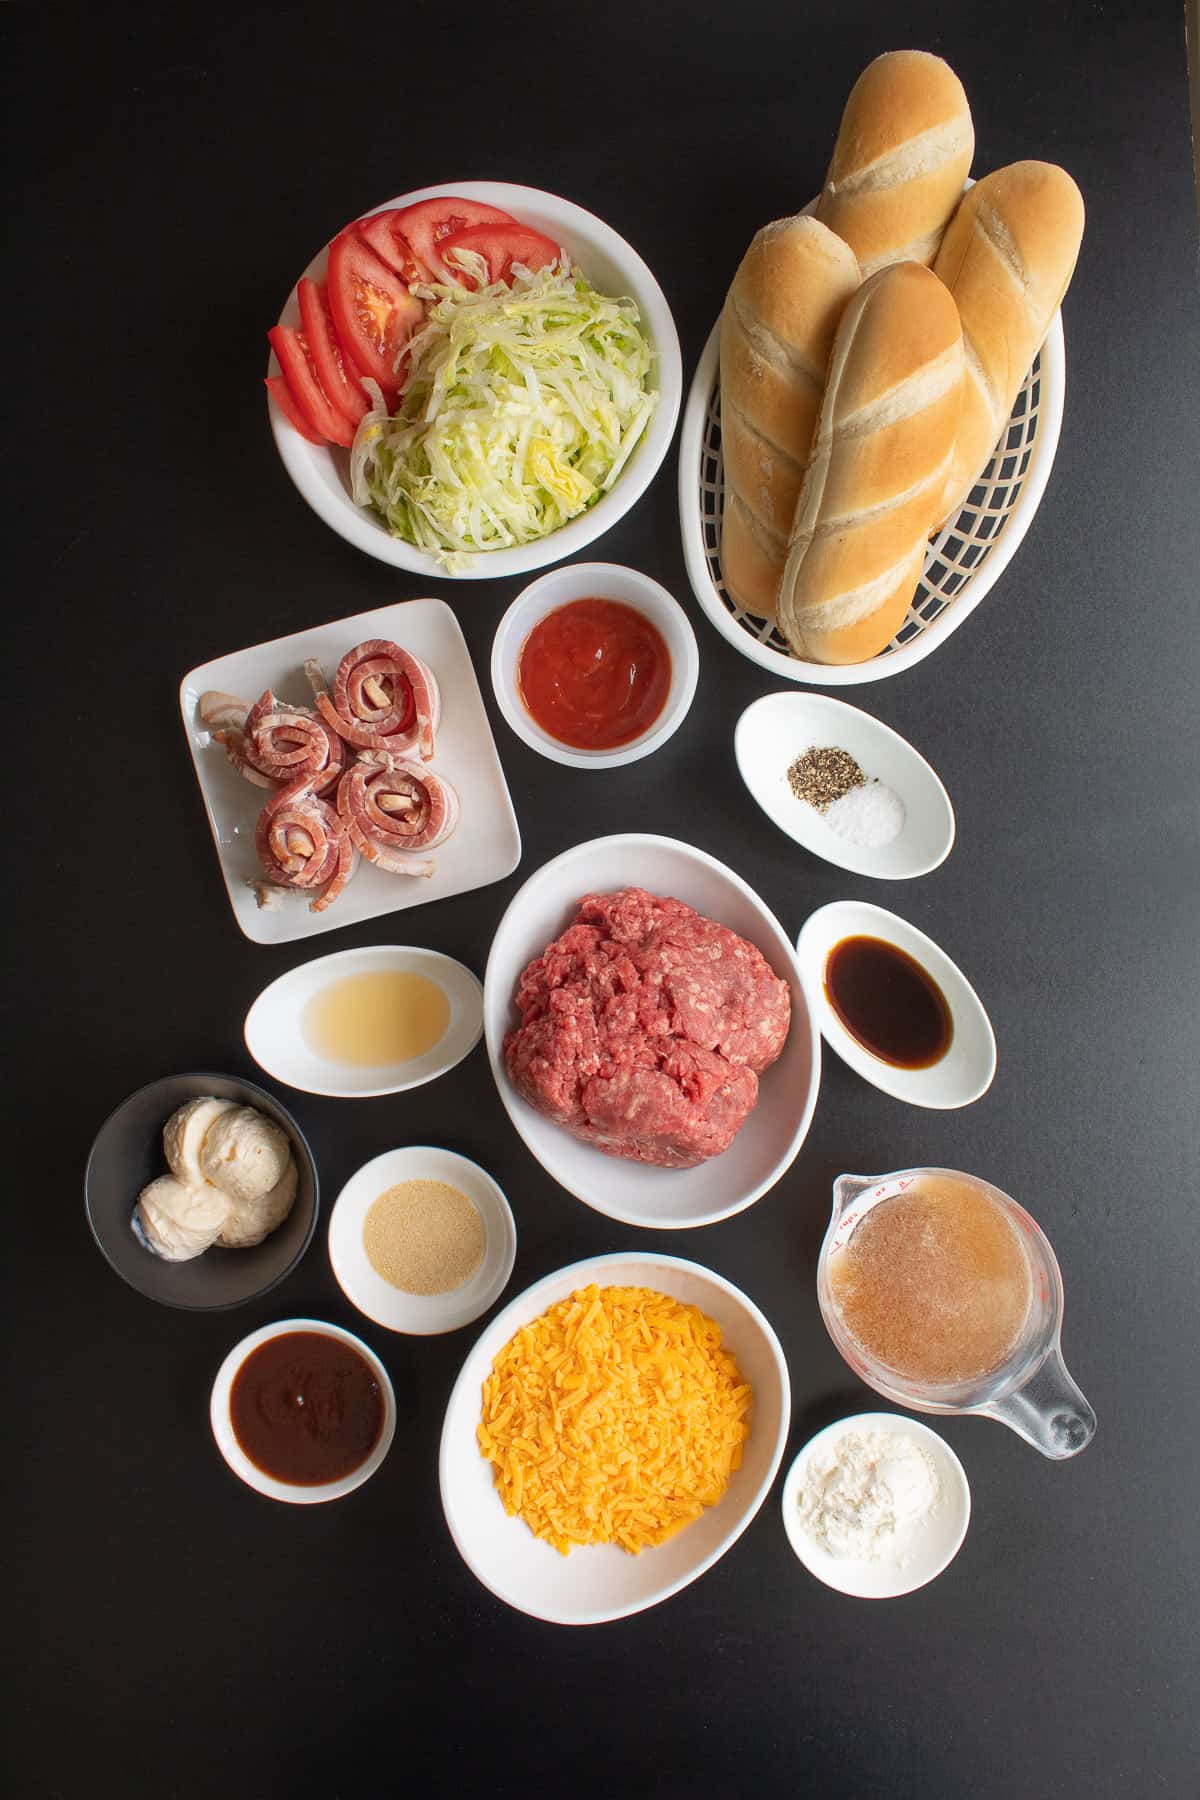 The ingredients for the cheeseburger subs are arranged in small bowls and plates on a black surface.